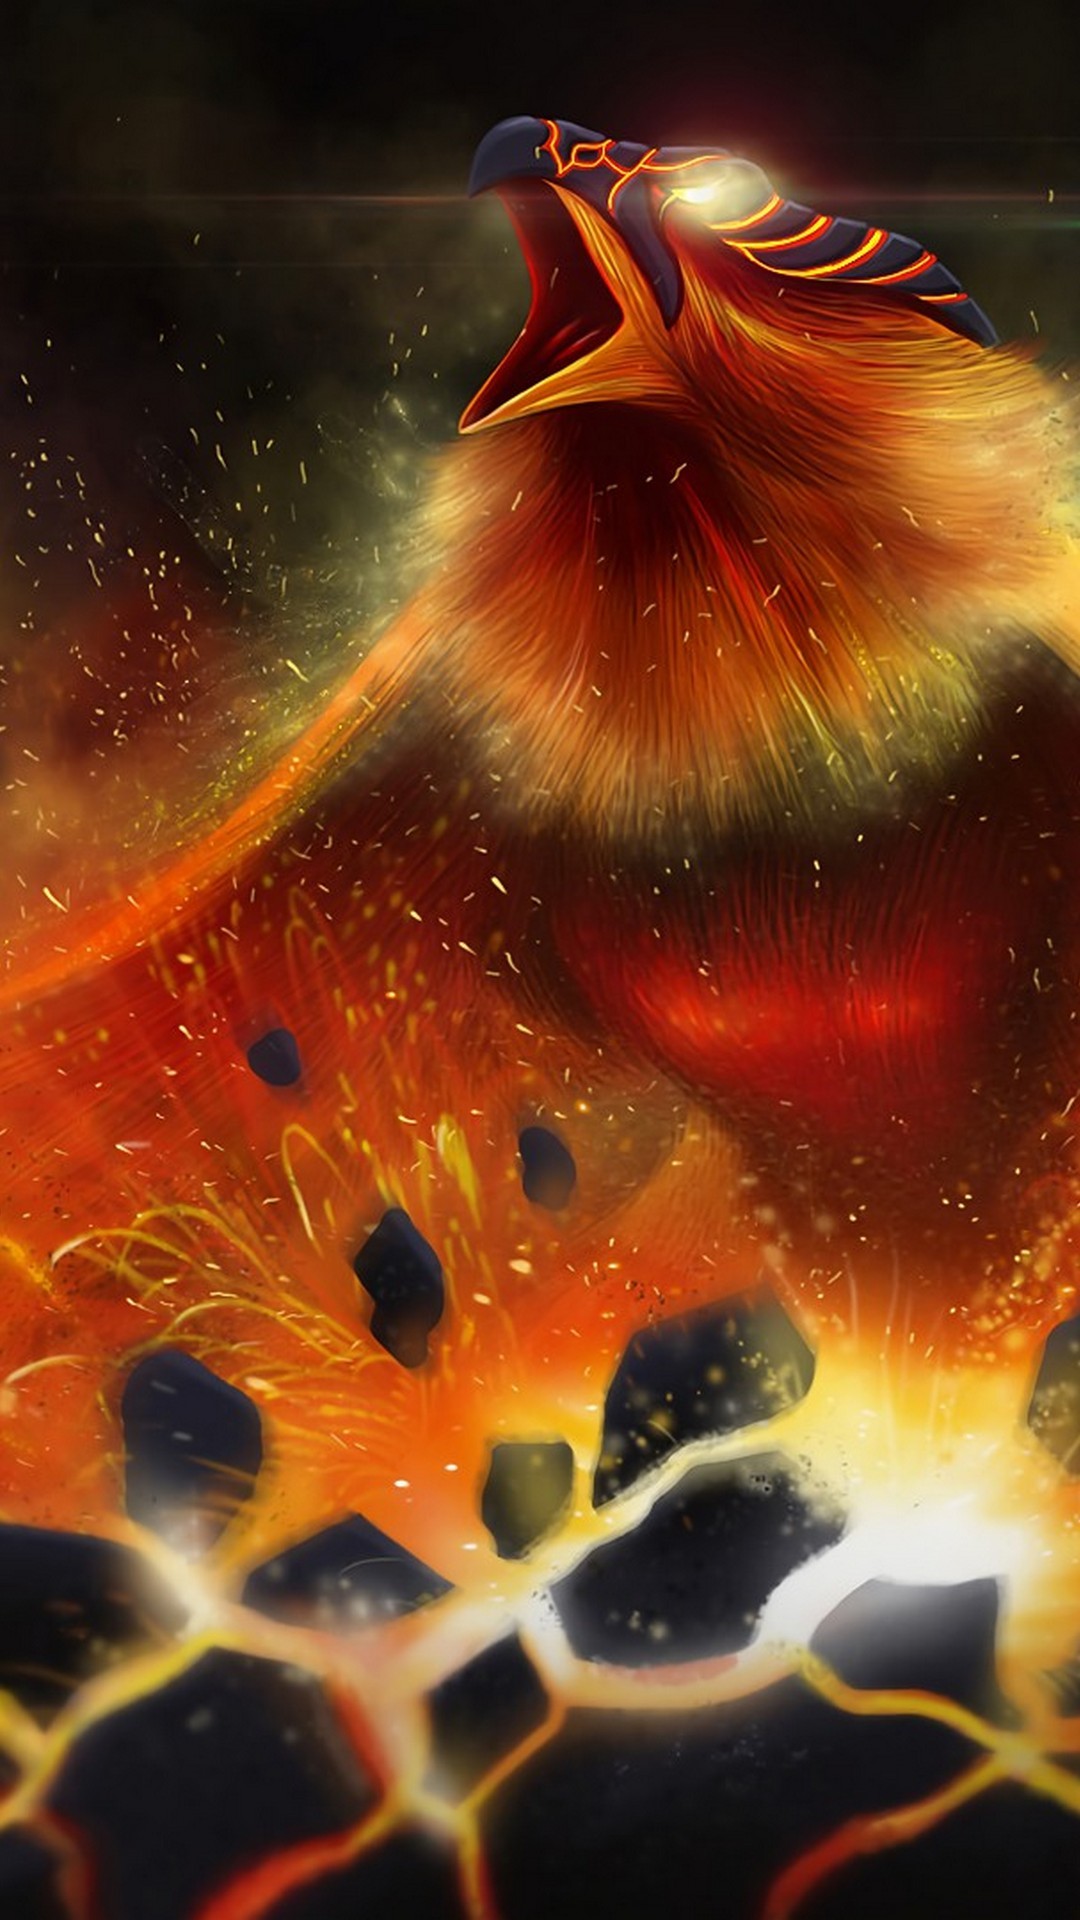 Dark Phoenix Wallpaper For iPhone with resolution 1080X1920 pixel. You can make this wallpaper for your iPhone 5, 6, 7, 8, X backgrounds, Mobile Screensaver, or iPad Lock Screen